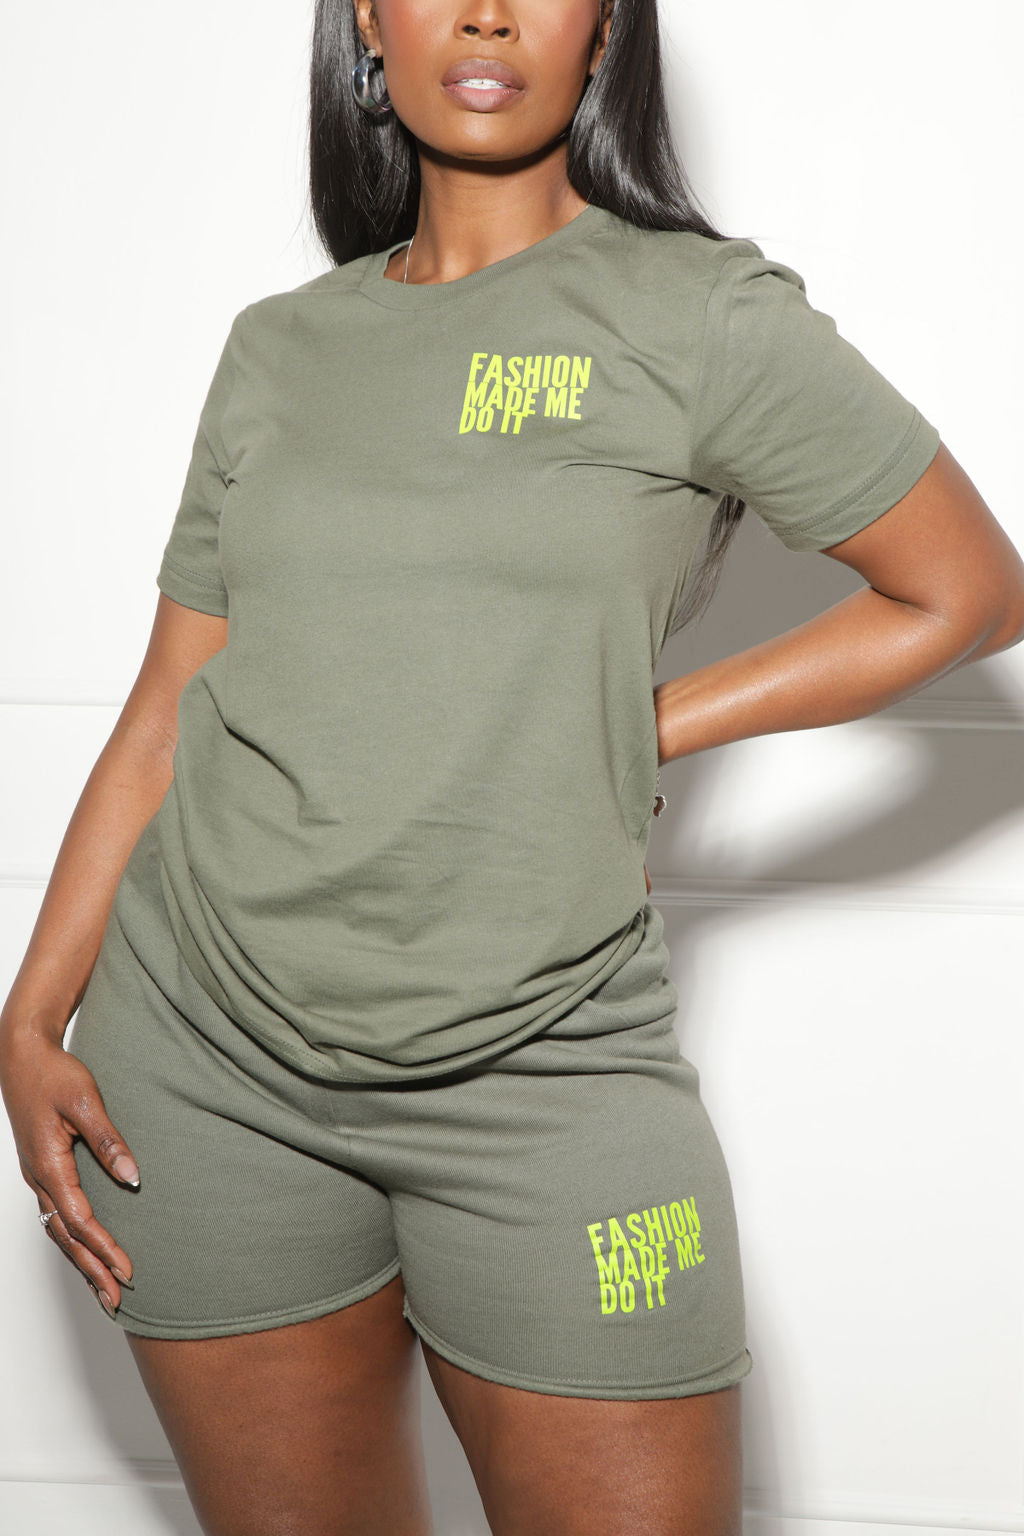 Fashion Made Me Do It Unisex Tee ARMY GREEN